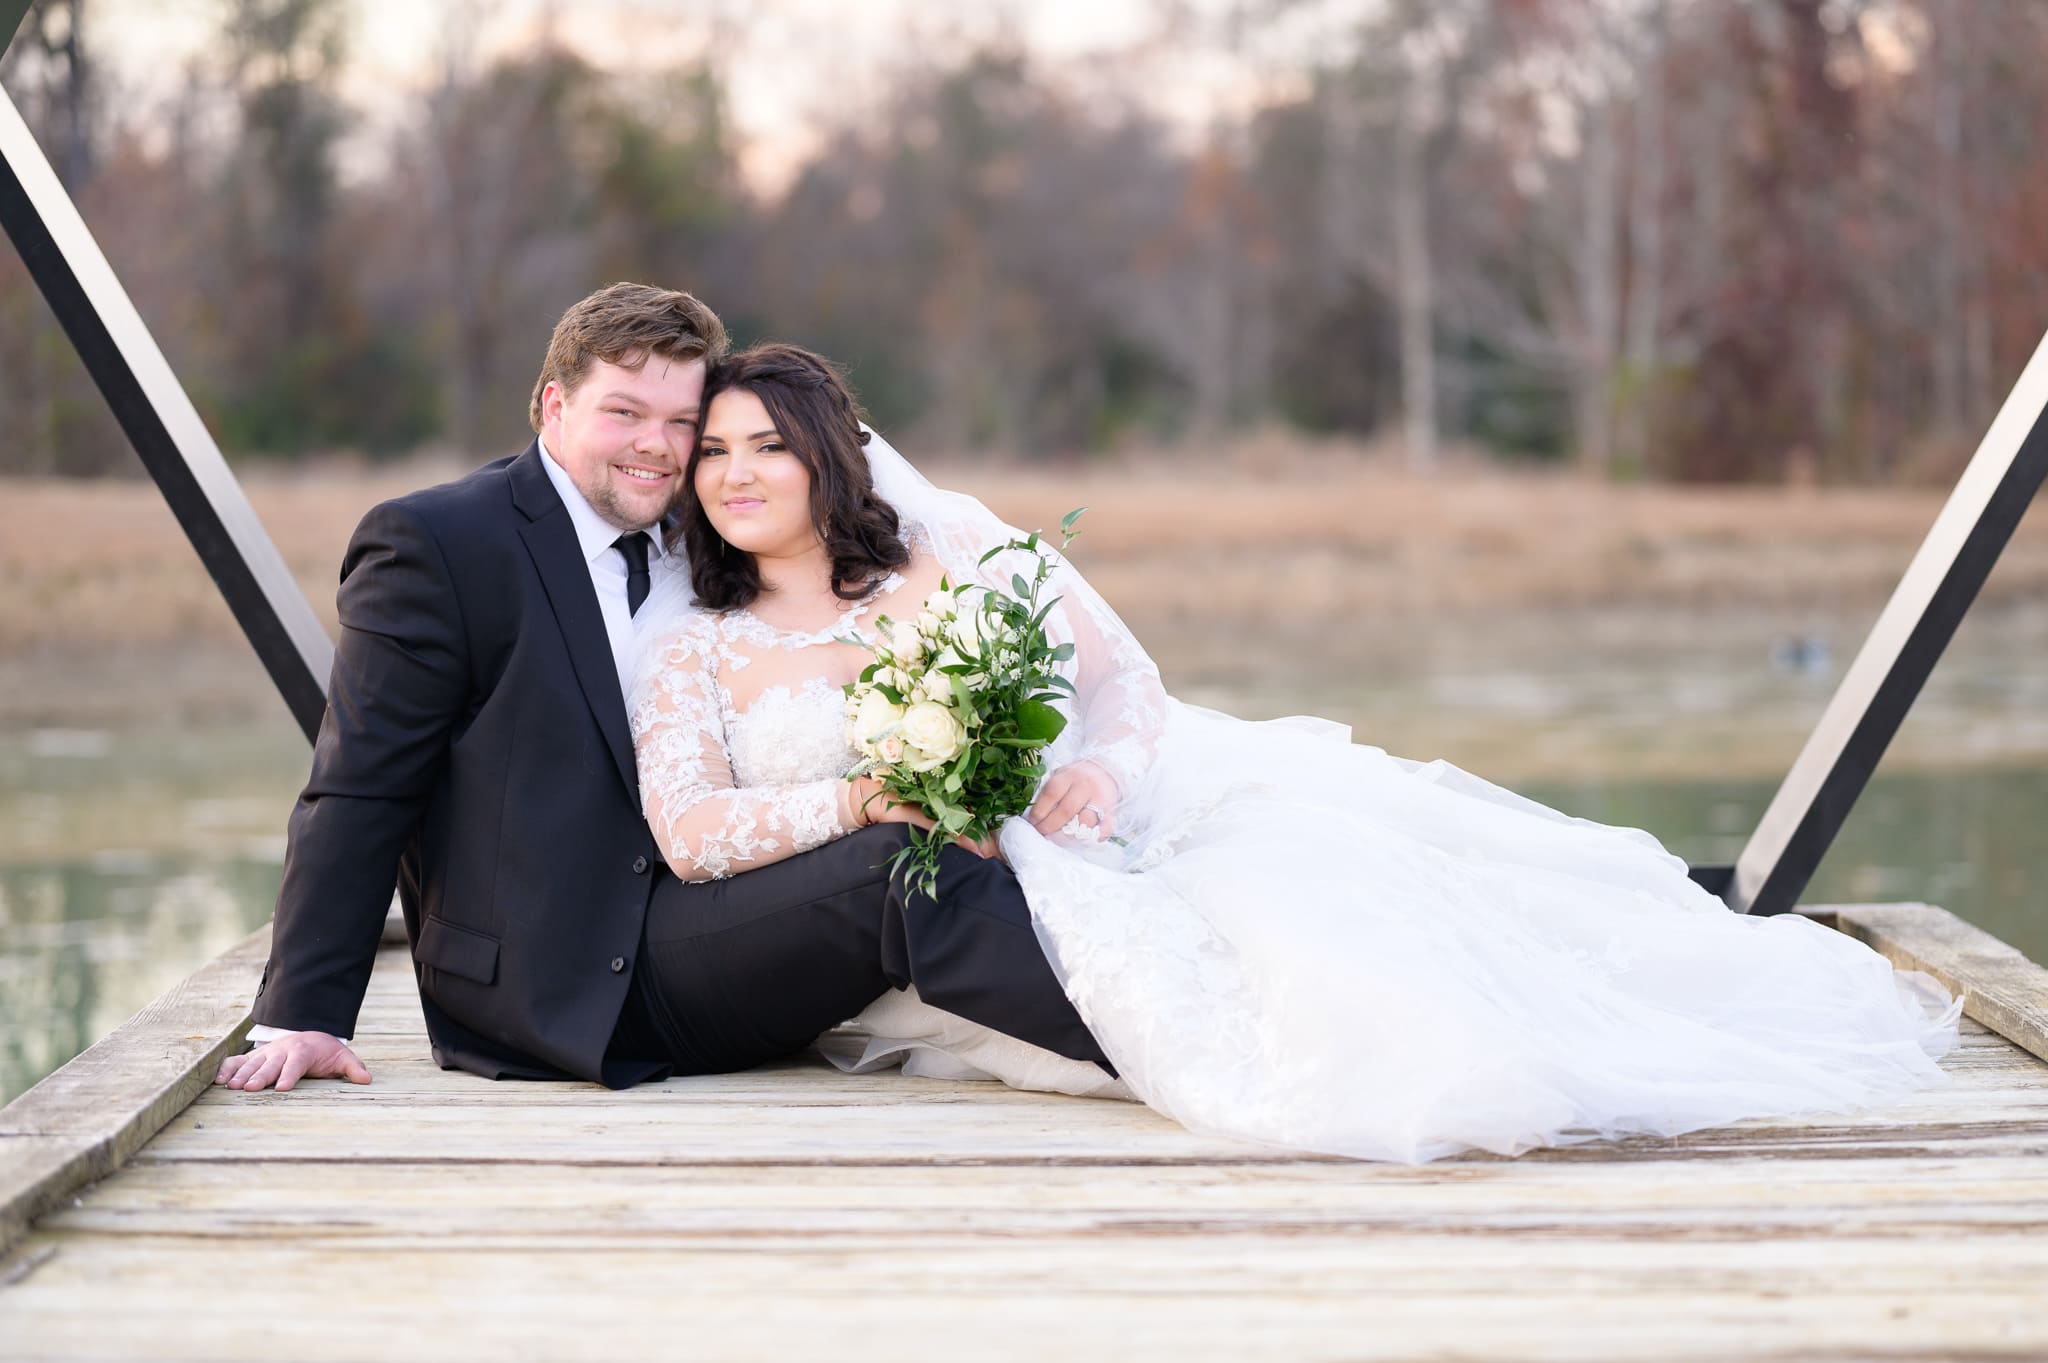 Bride and groom laying together on the dock - The Venue at White Oaks Farm